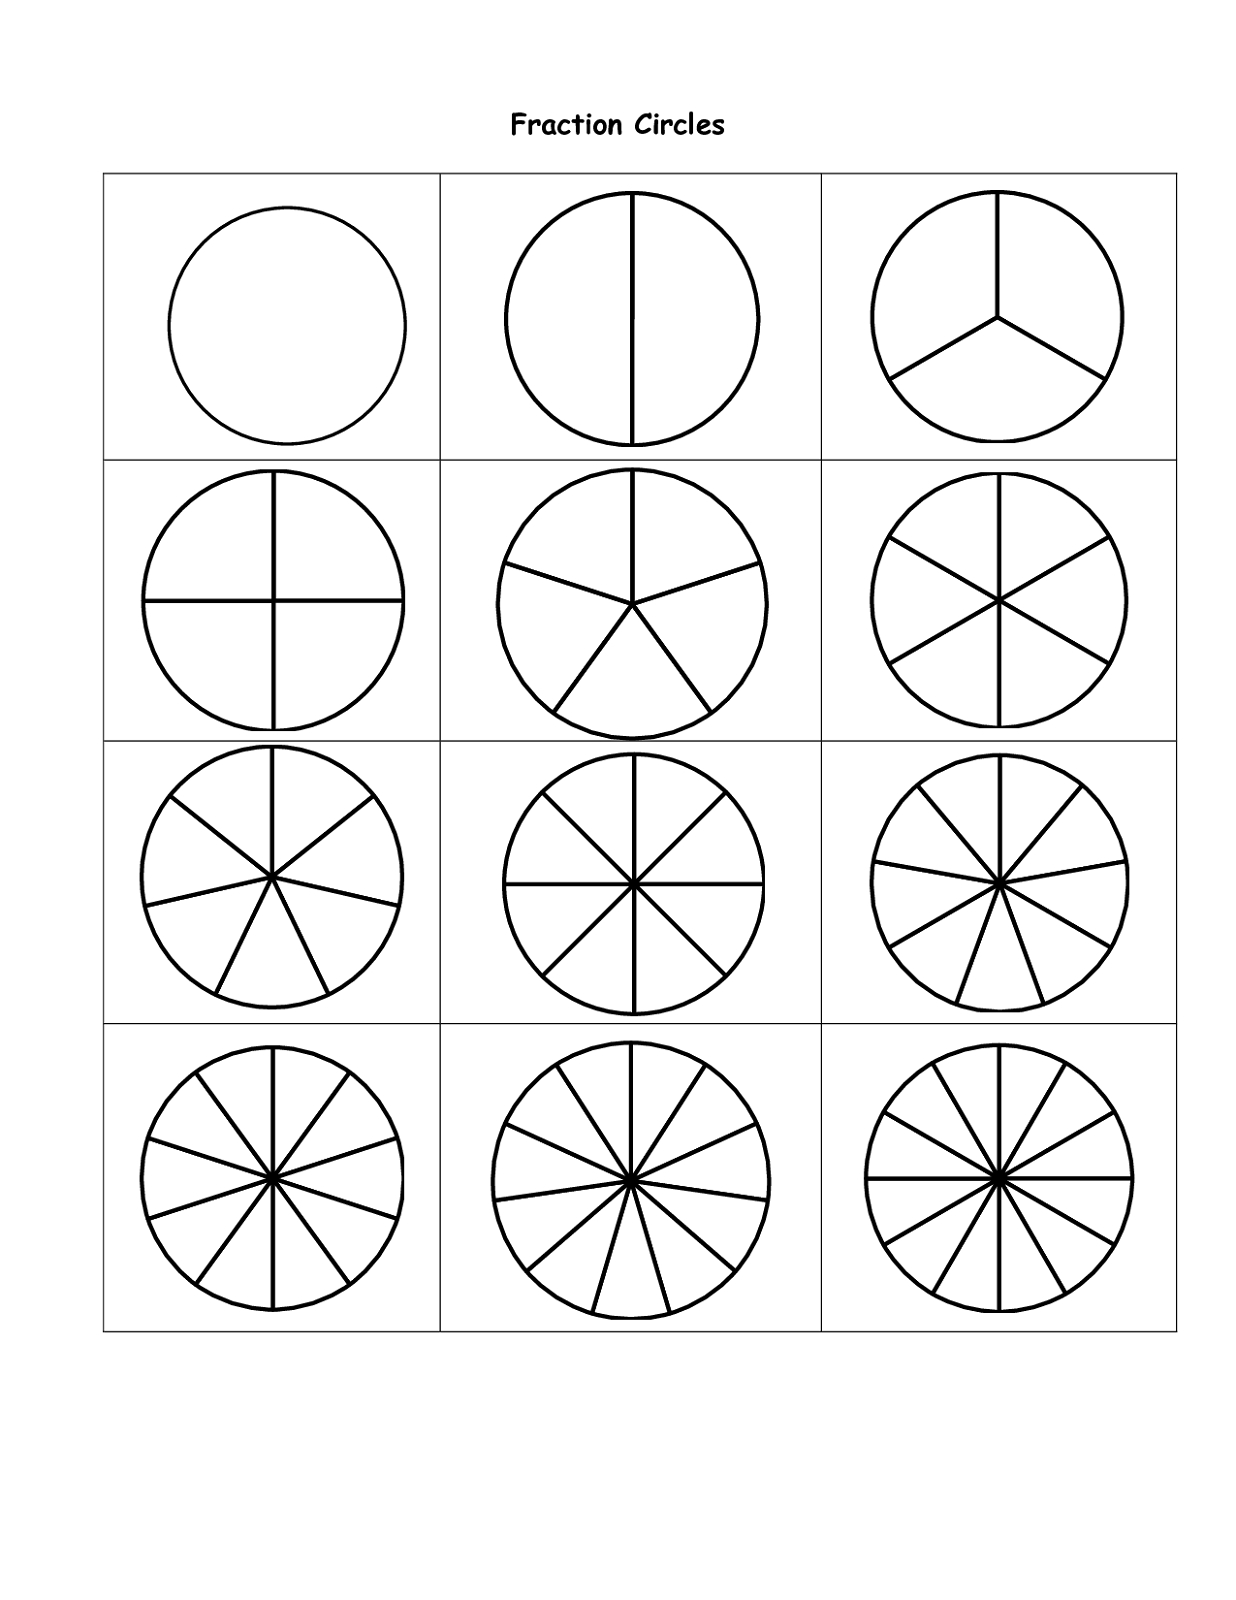 Summary -&amp;gt; Free Printable Fraction Circles File Folder Fun - Free Printable Blank Fraction Circles